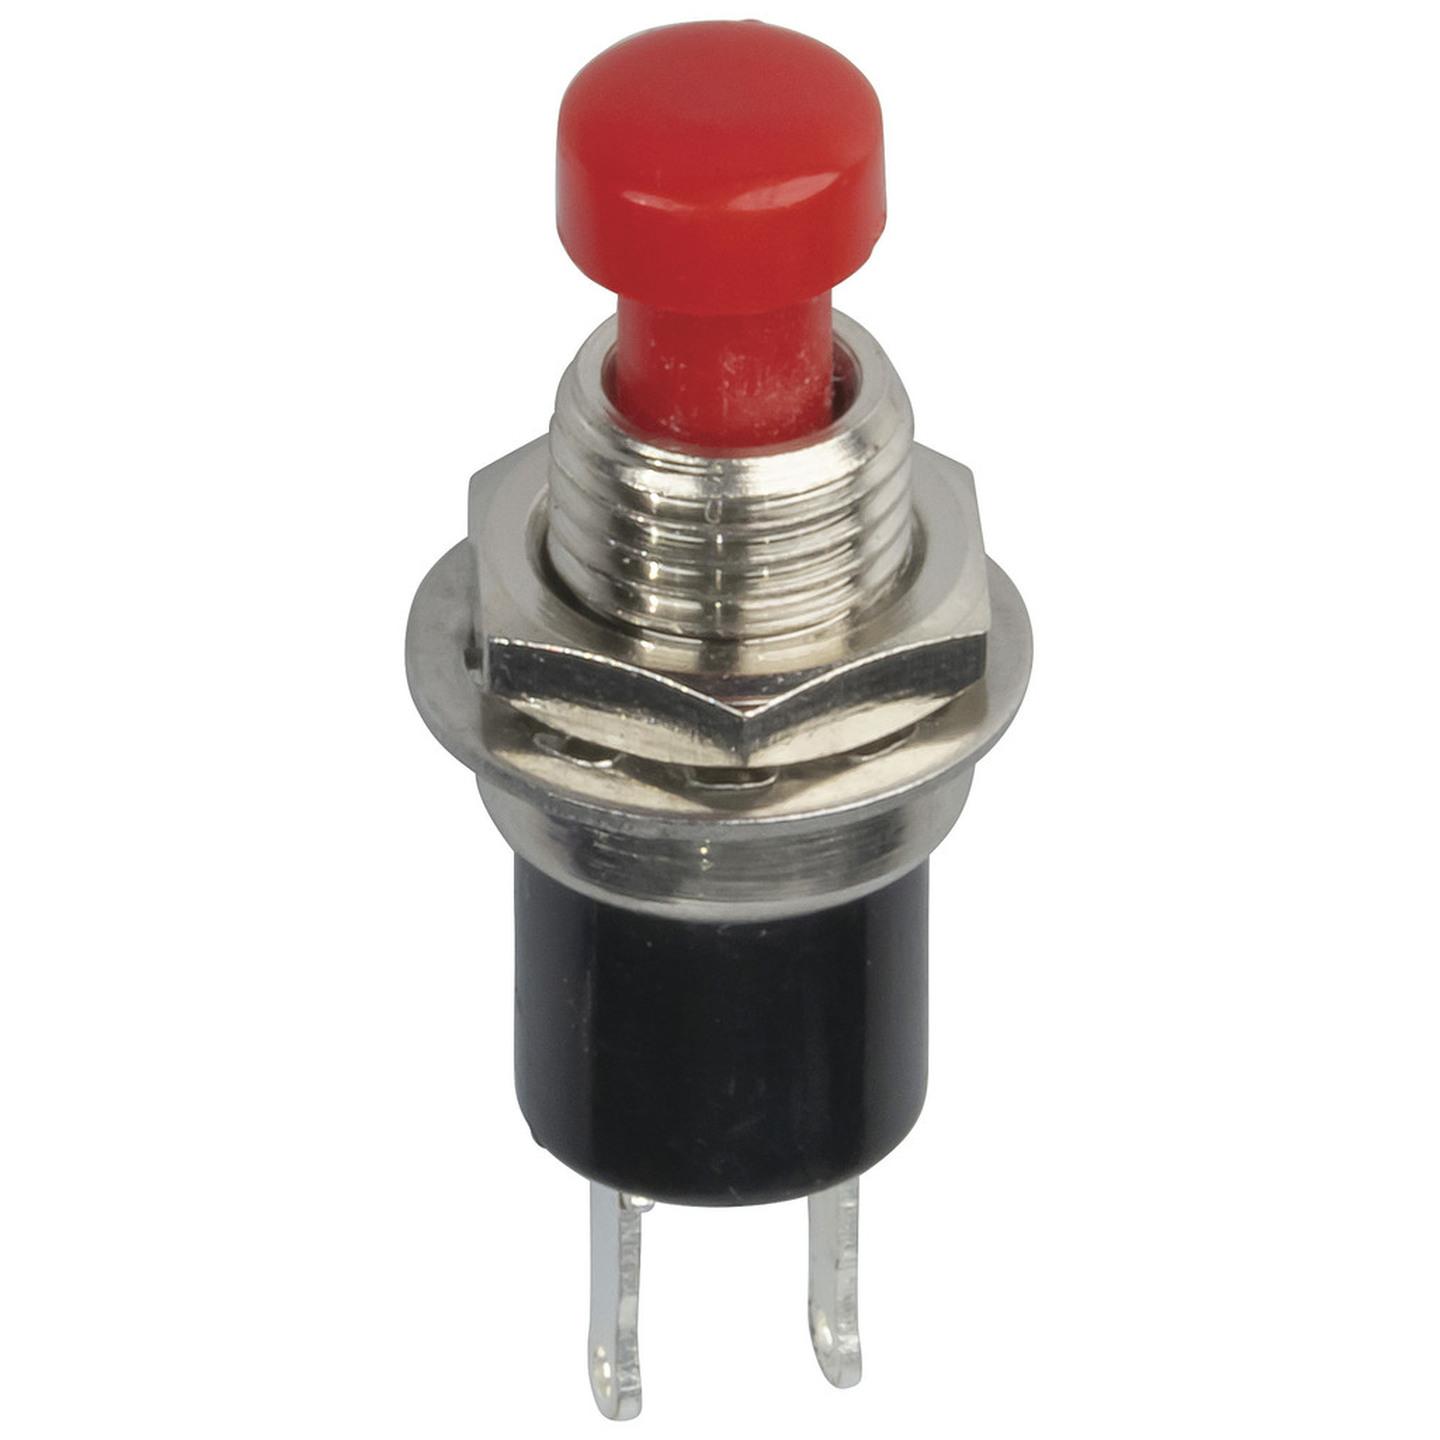 Red Miniature Pushbutton - SPST Momentary Action 125V 1A rating